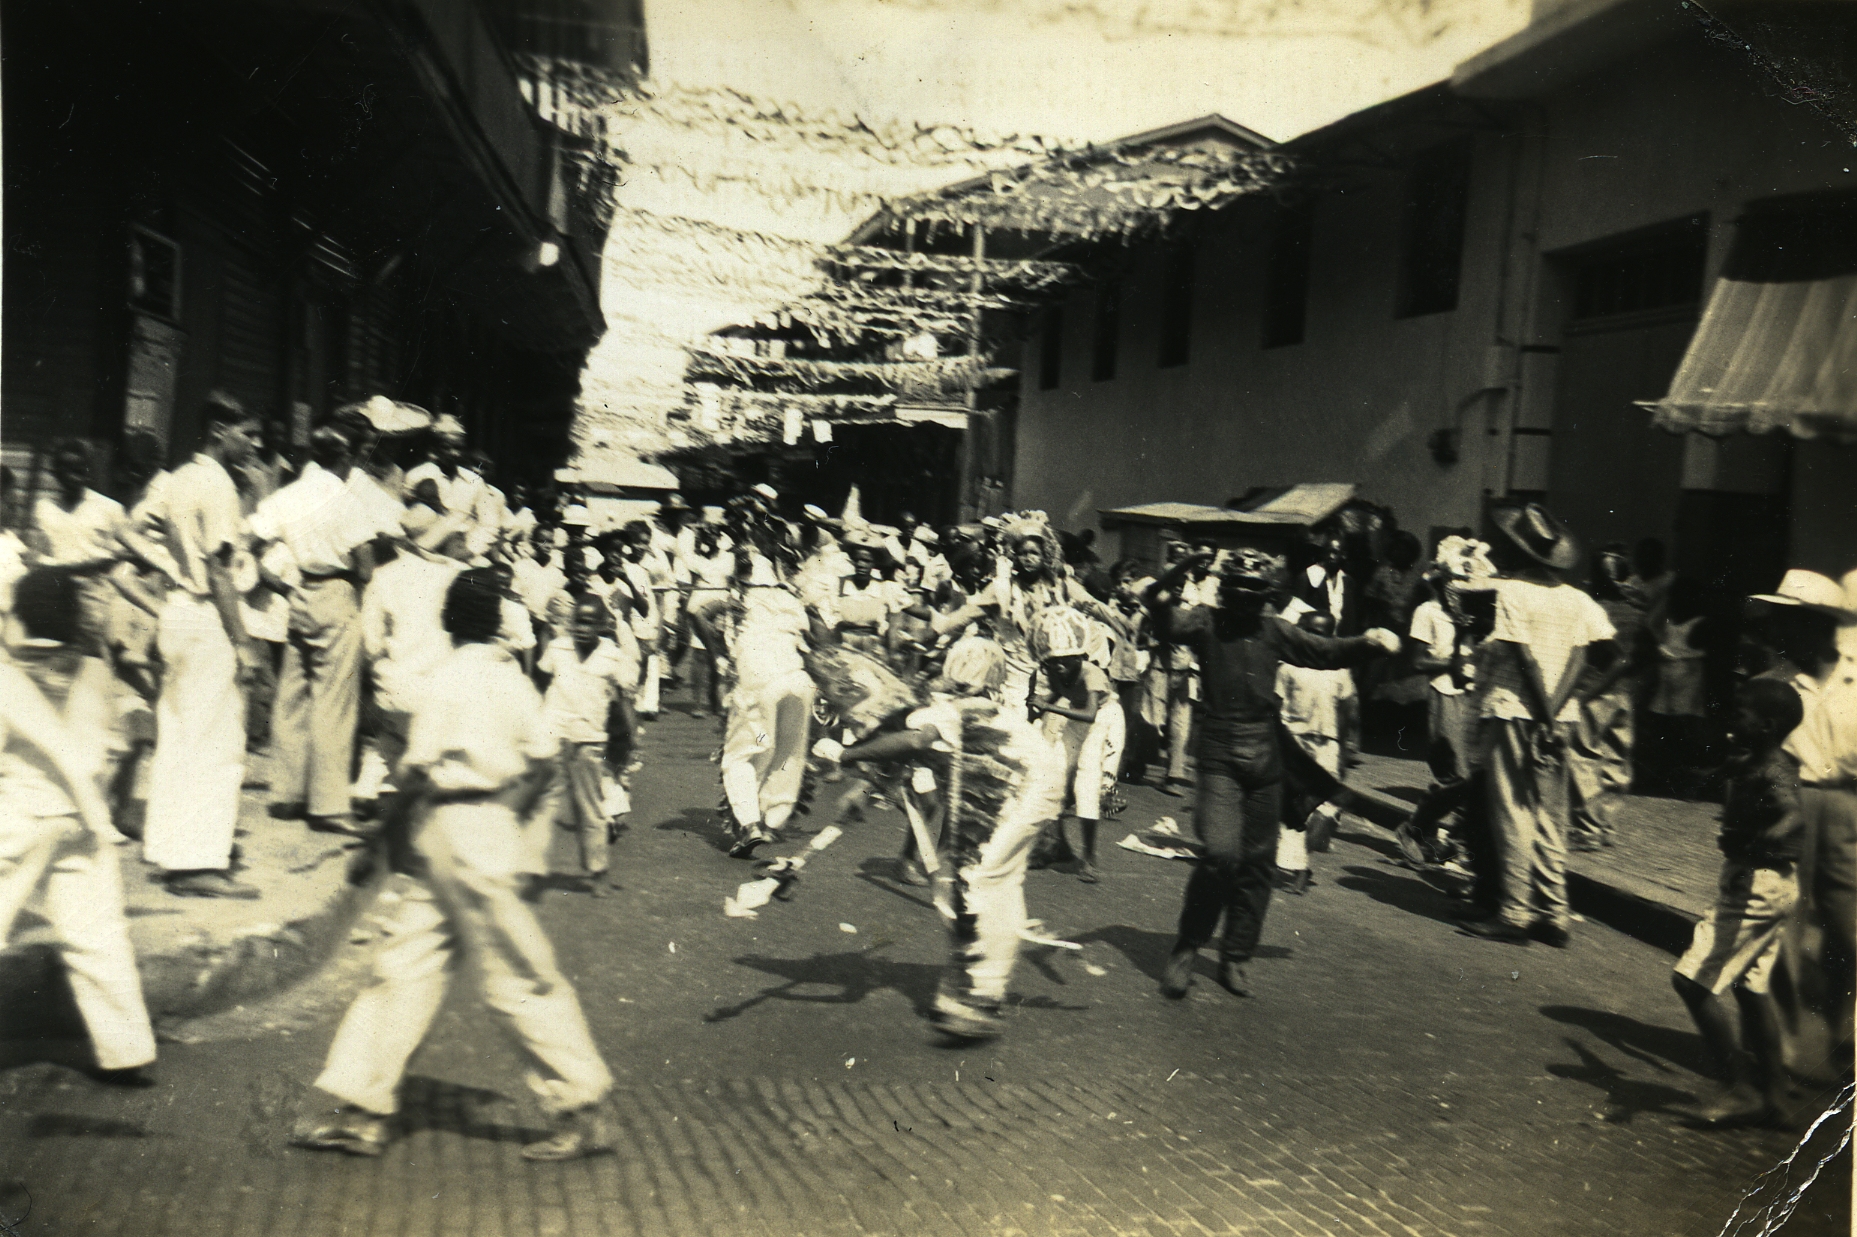 a group of people in street with many wearing hat